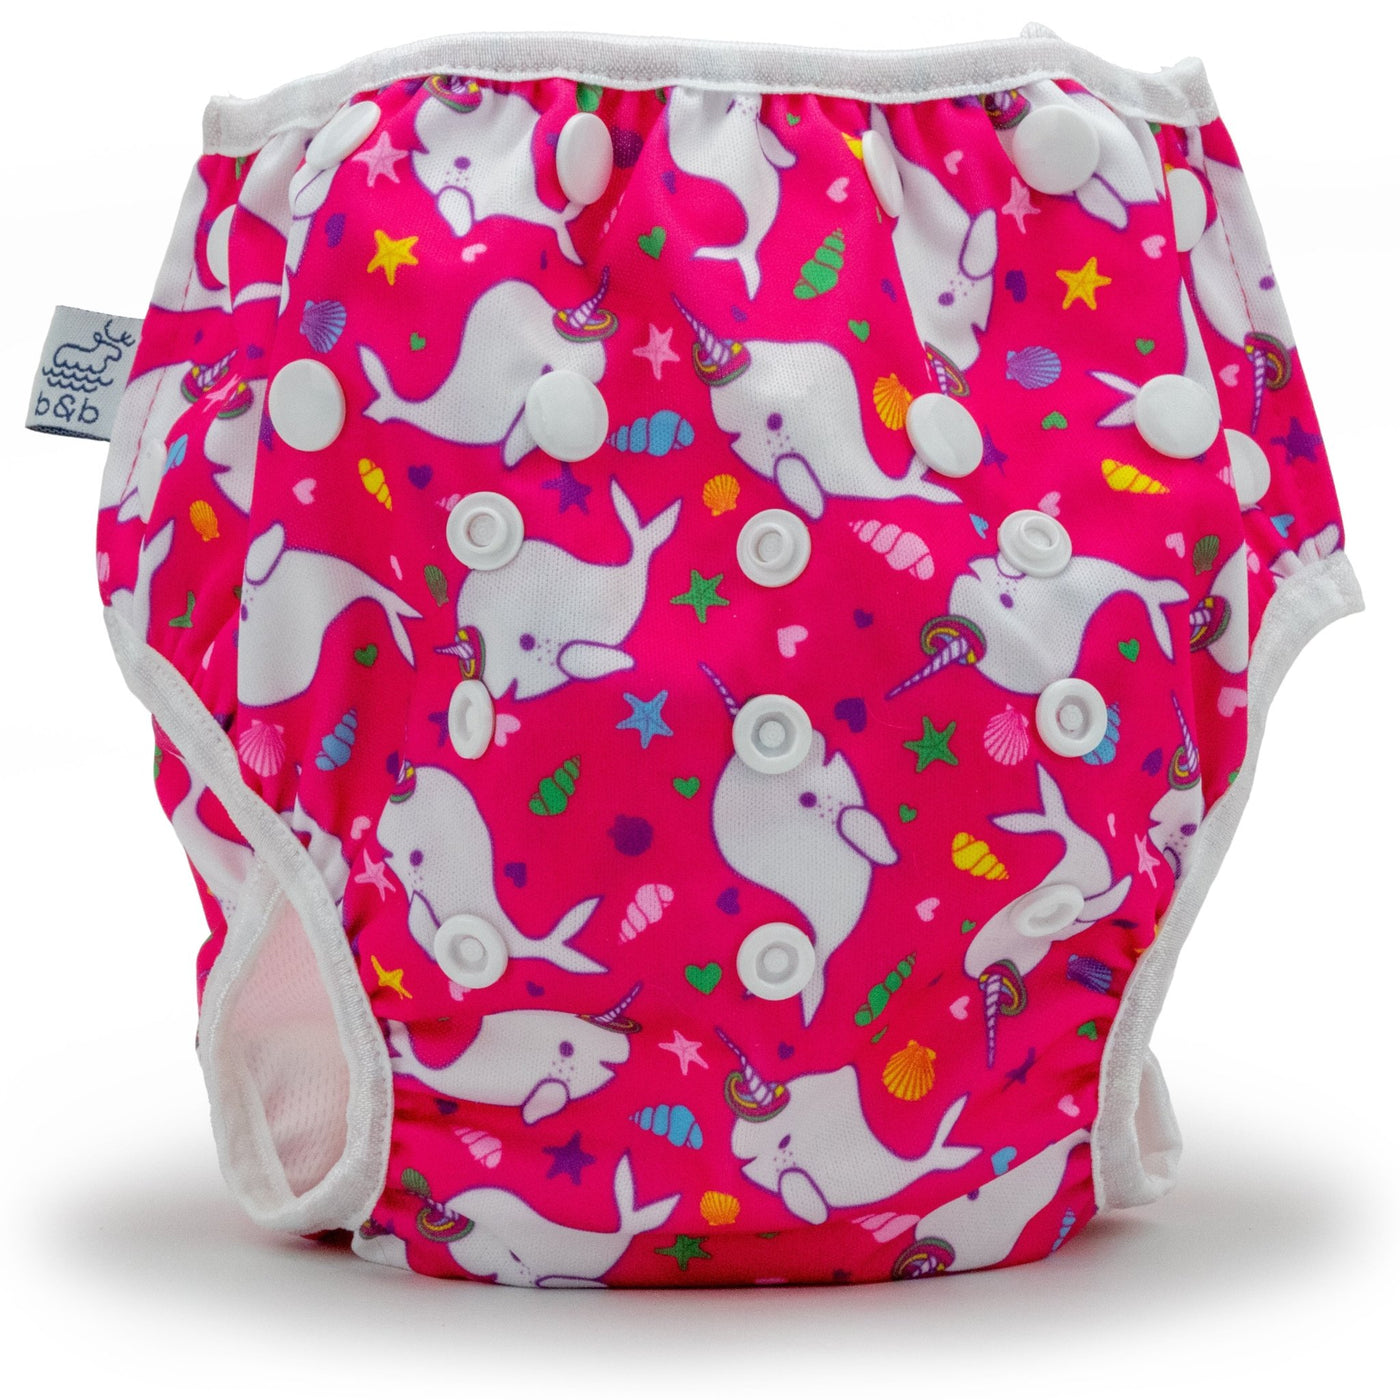 Narwhals 2-5 years Nageuret Swim Diaper (Hot Pink)